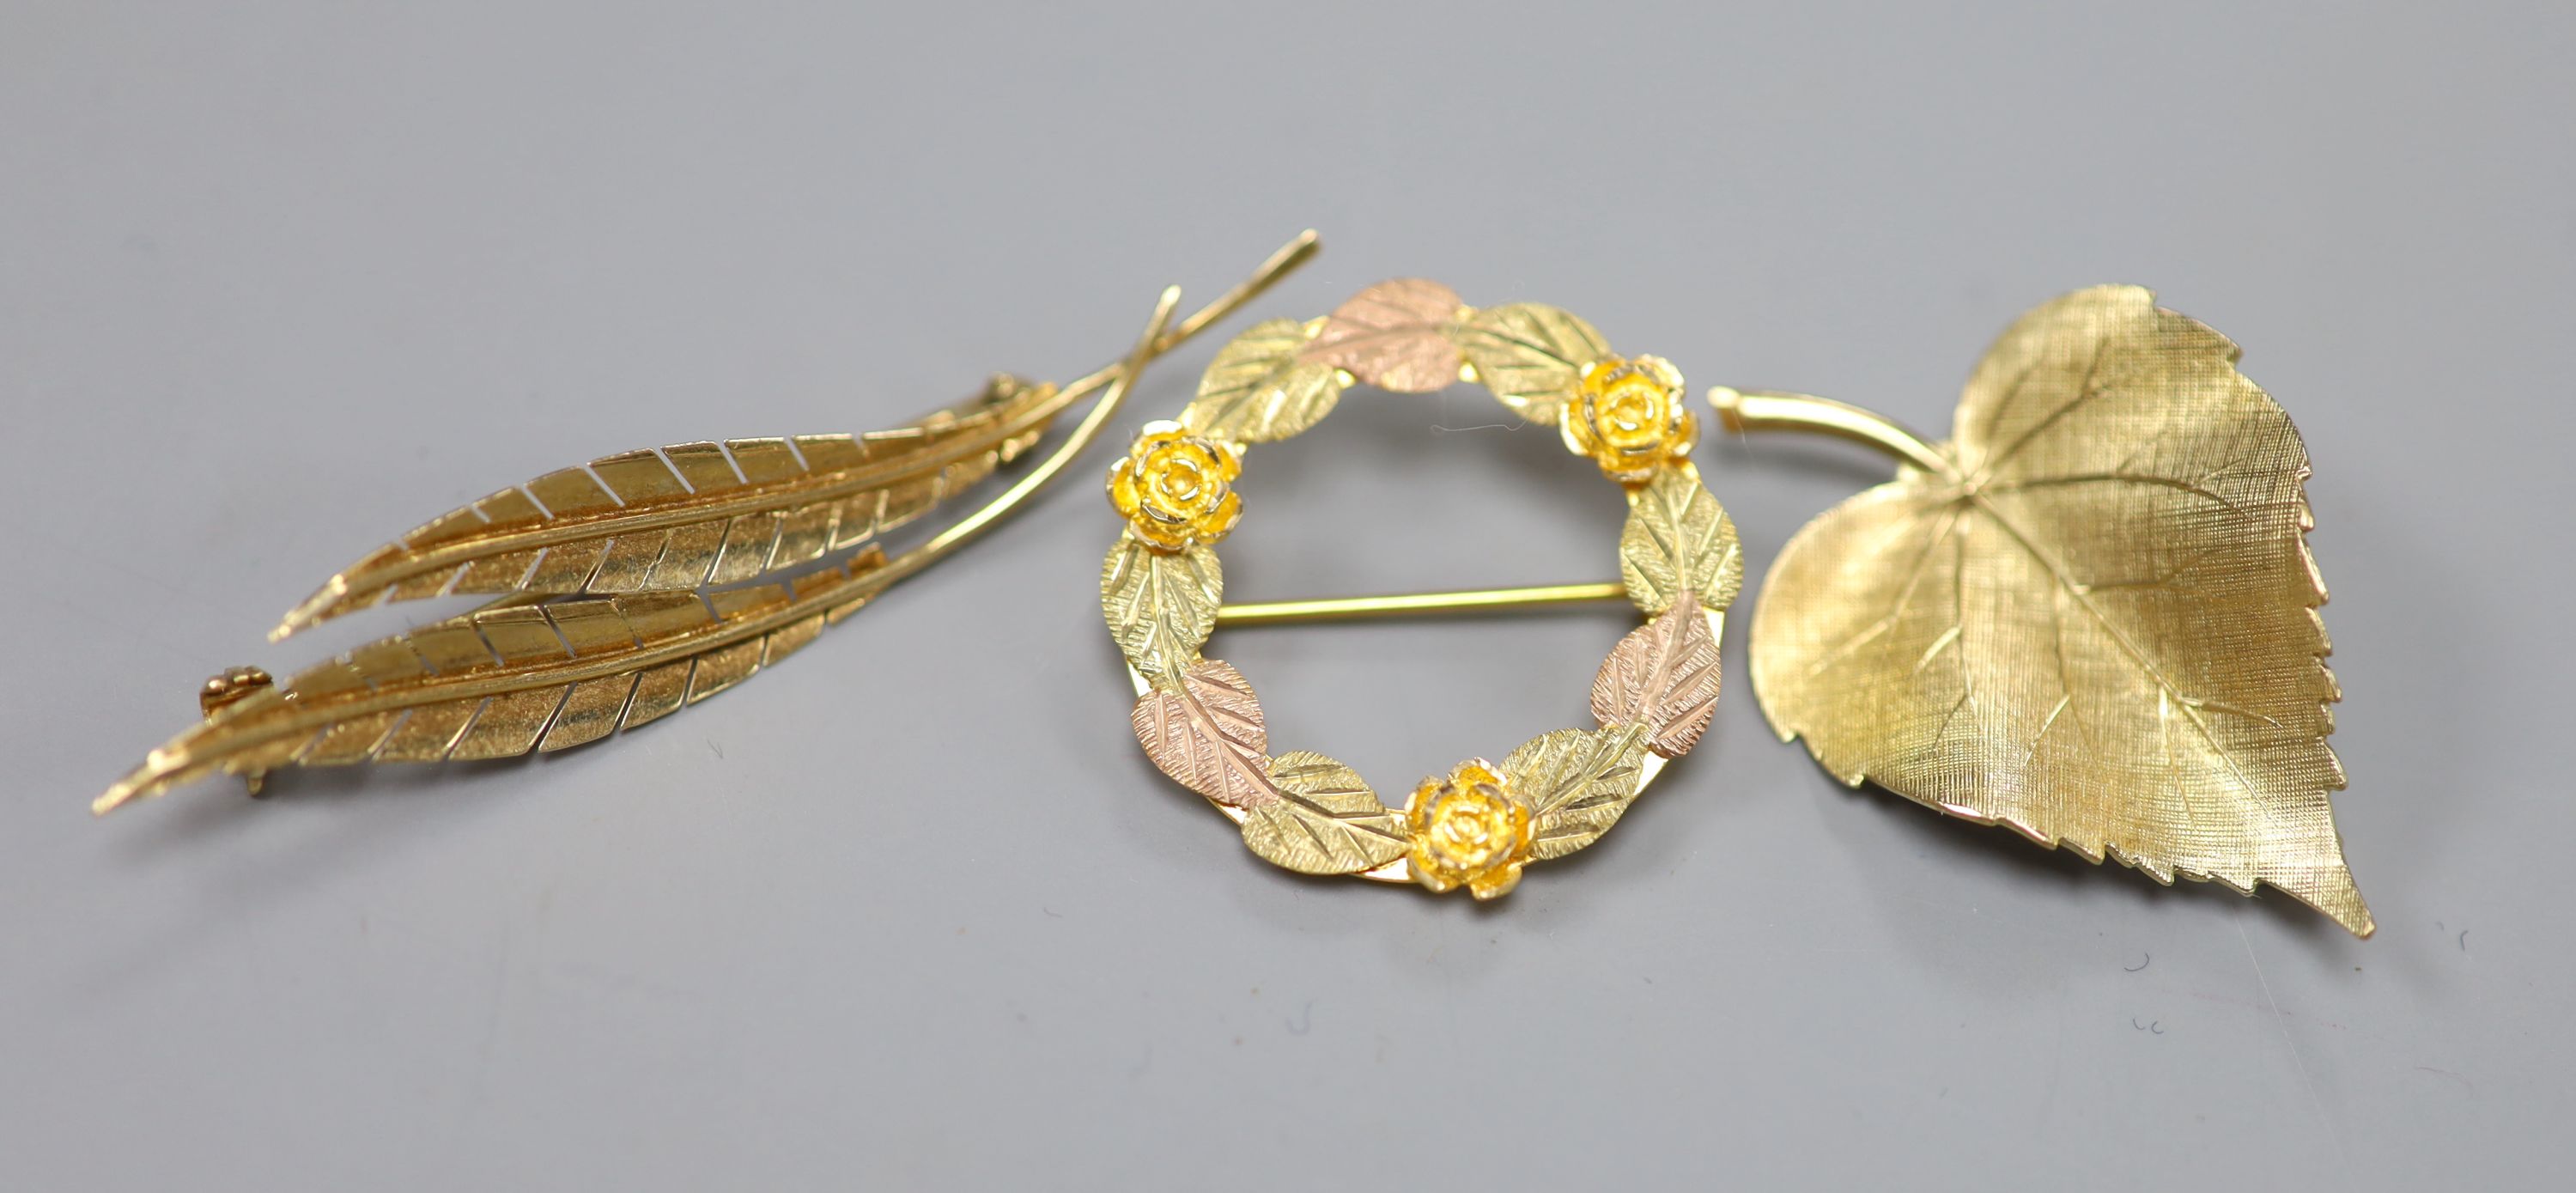 A 585 yellow metal double leaf brooch, 51mm, 2.5 grams, a 9ct gold leaf brooch, 3 grams and a 10k